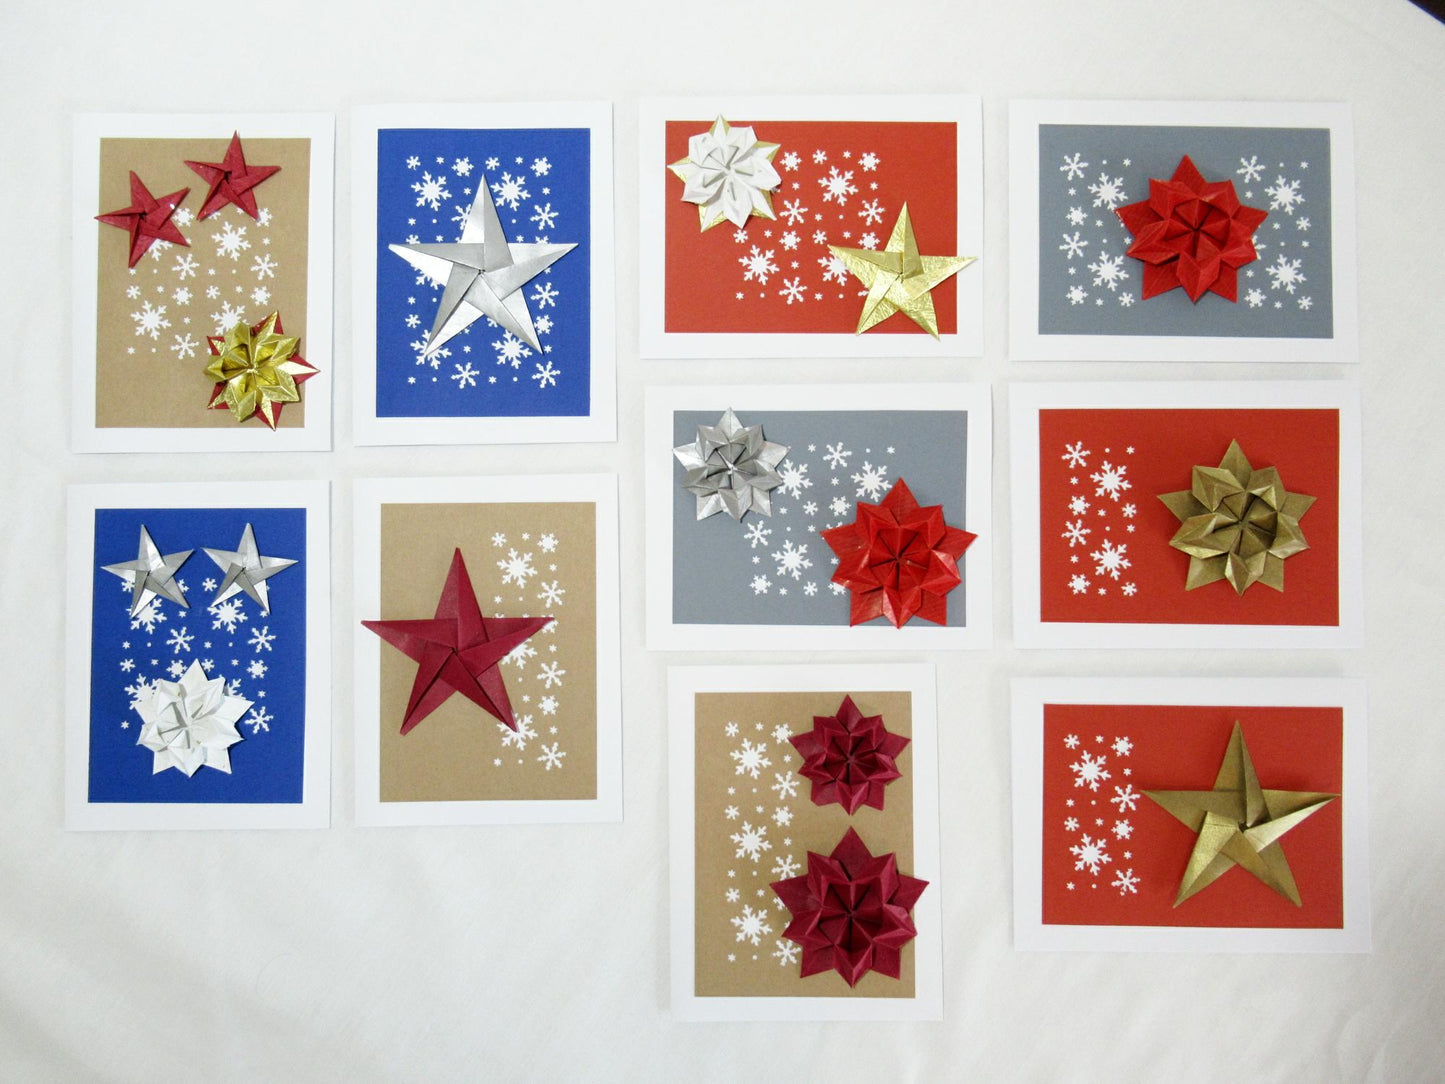 Set of ten white cards. Each card has either a red, blue, grey, or kraft background with white snowflakes. On top are a variety of origami stars in red, silver, white, and gold.